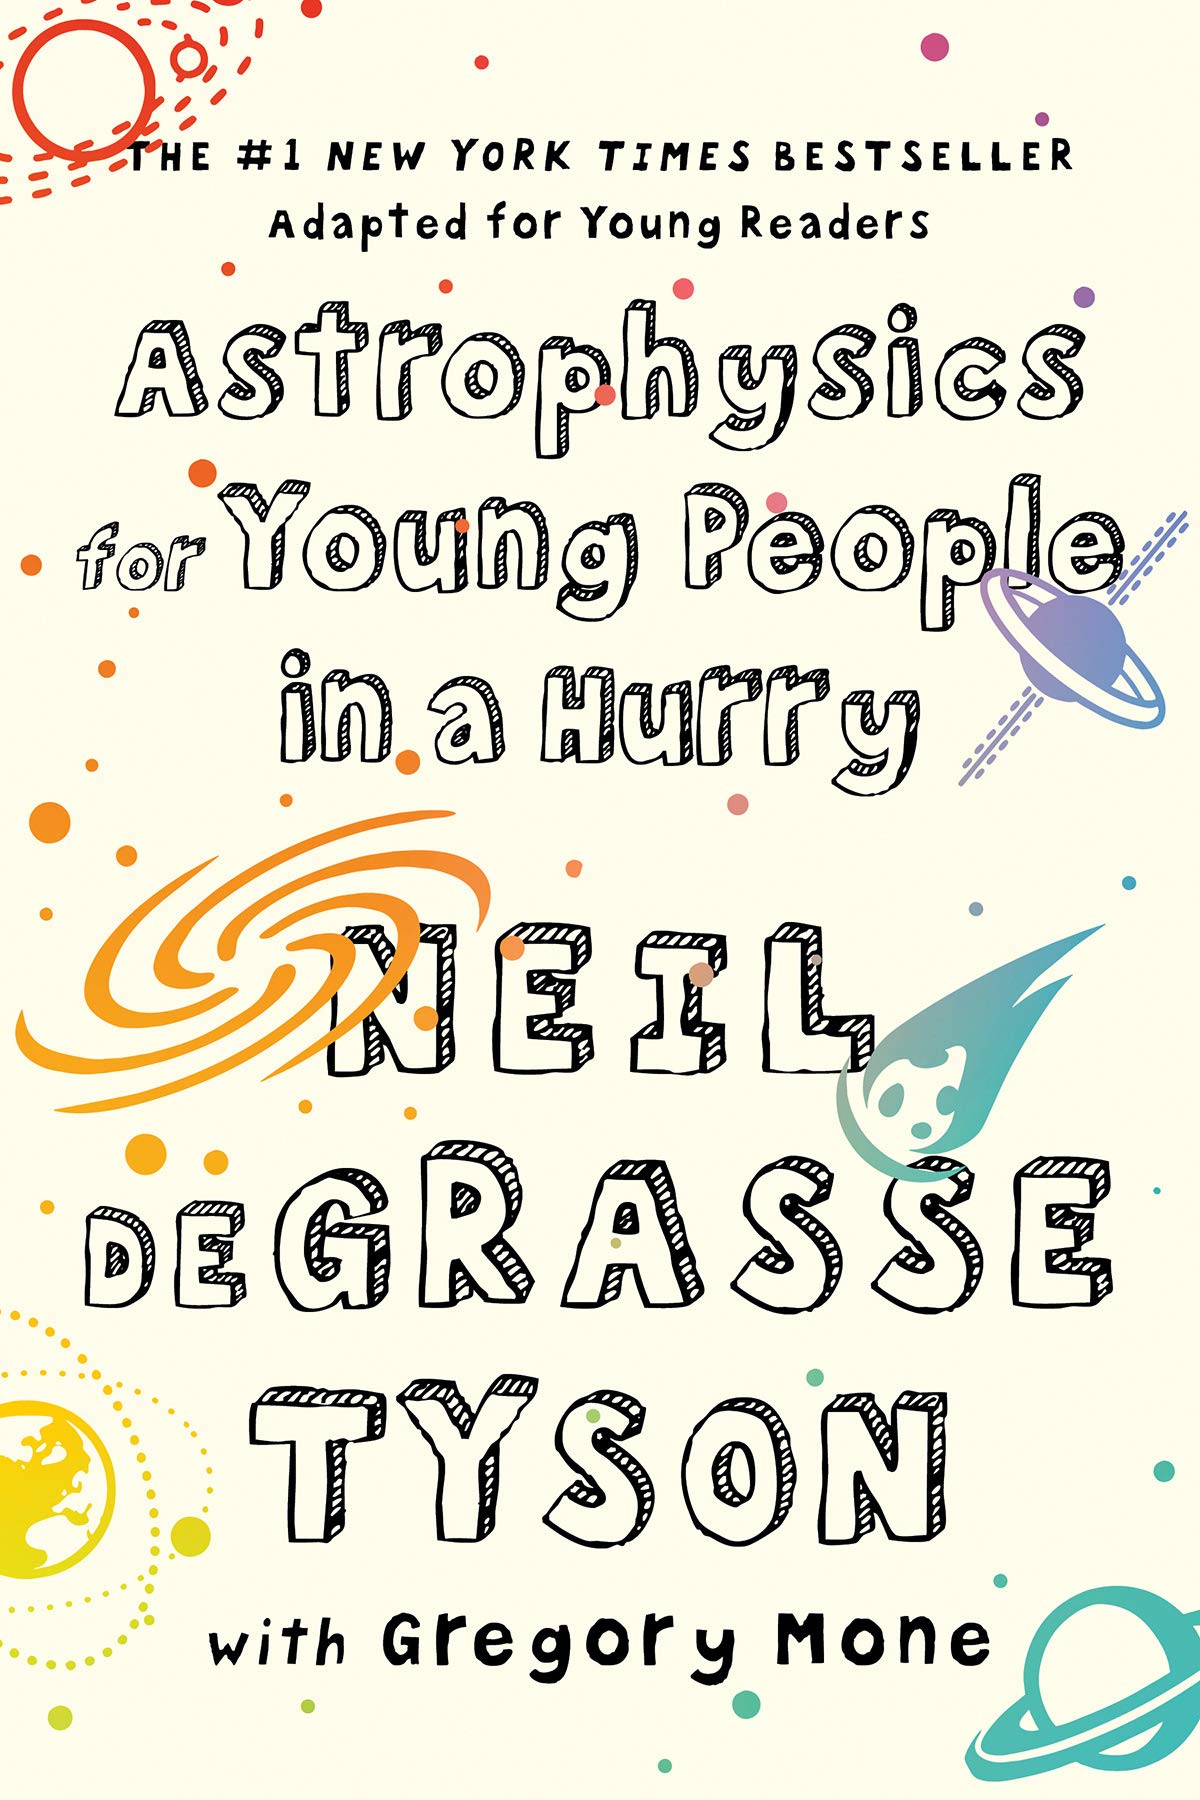 Link to the book Astrophysics For Young Poeple in a Hurry by Neil deGrasse Tyson with Gregory Mone.